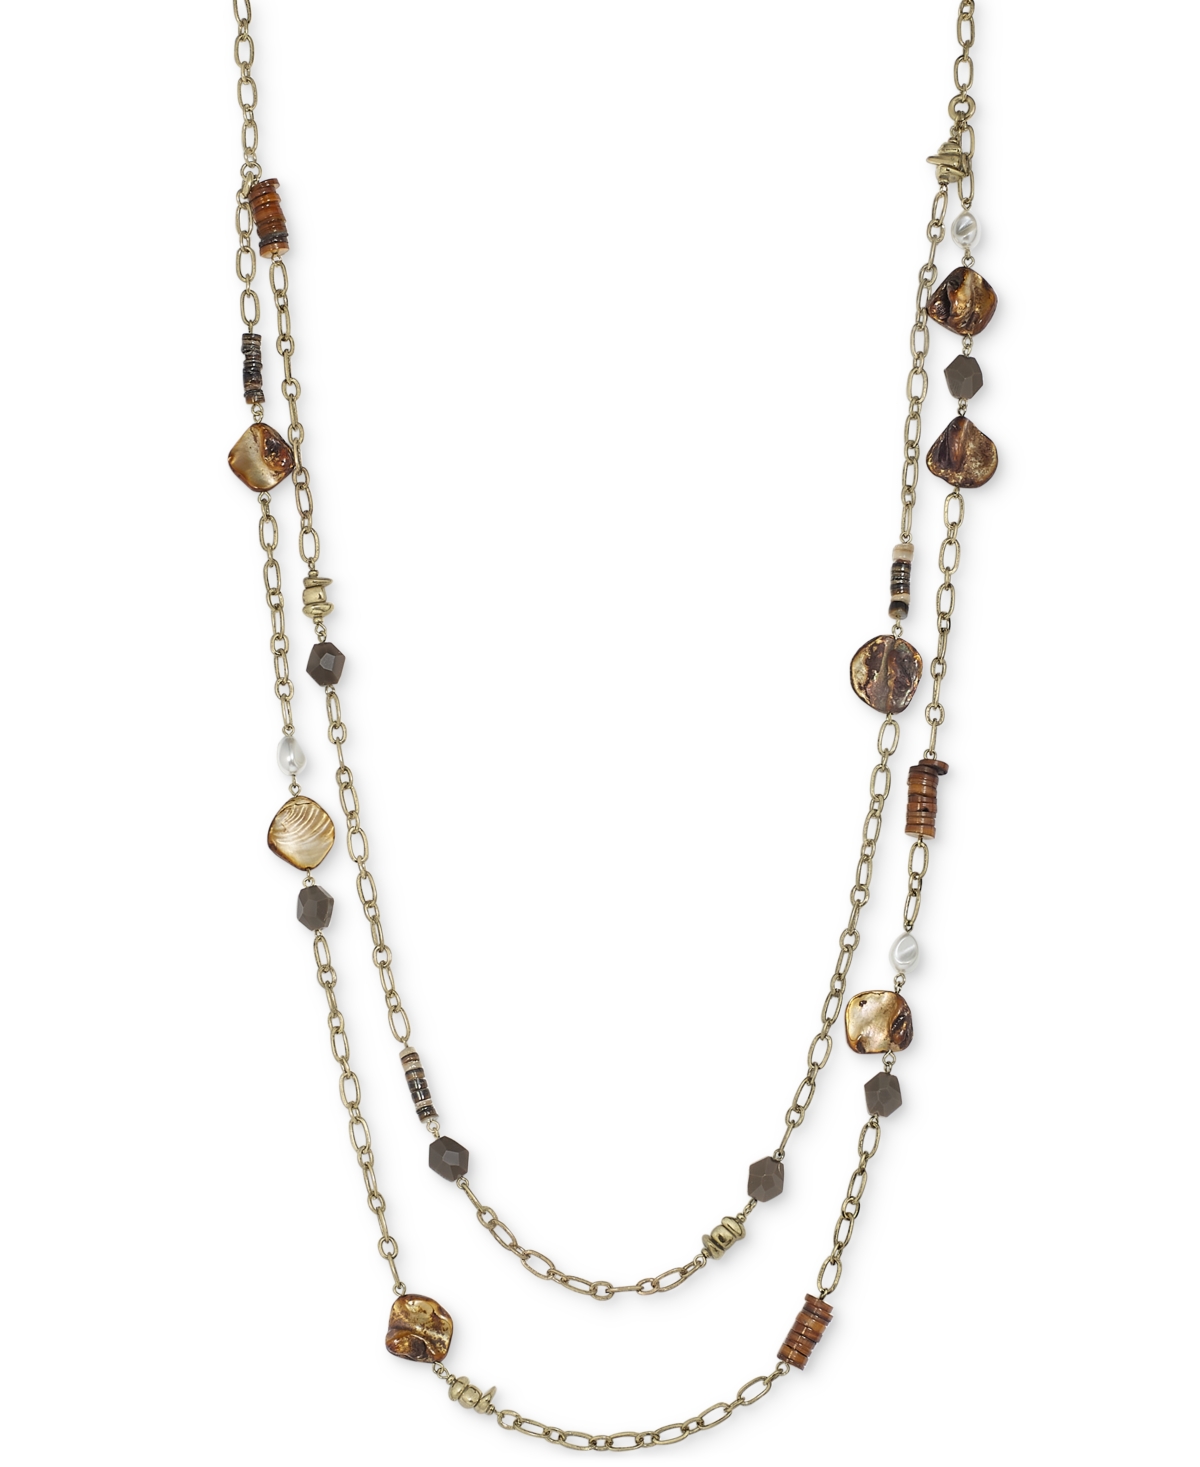 Style & Co Gold-tone Beaded Long Layered Necklace, 46-1/2" + 3" Extender, Created For Macy's In Brown